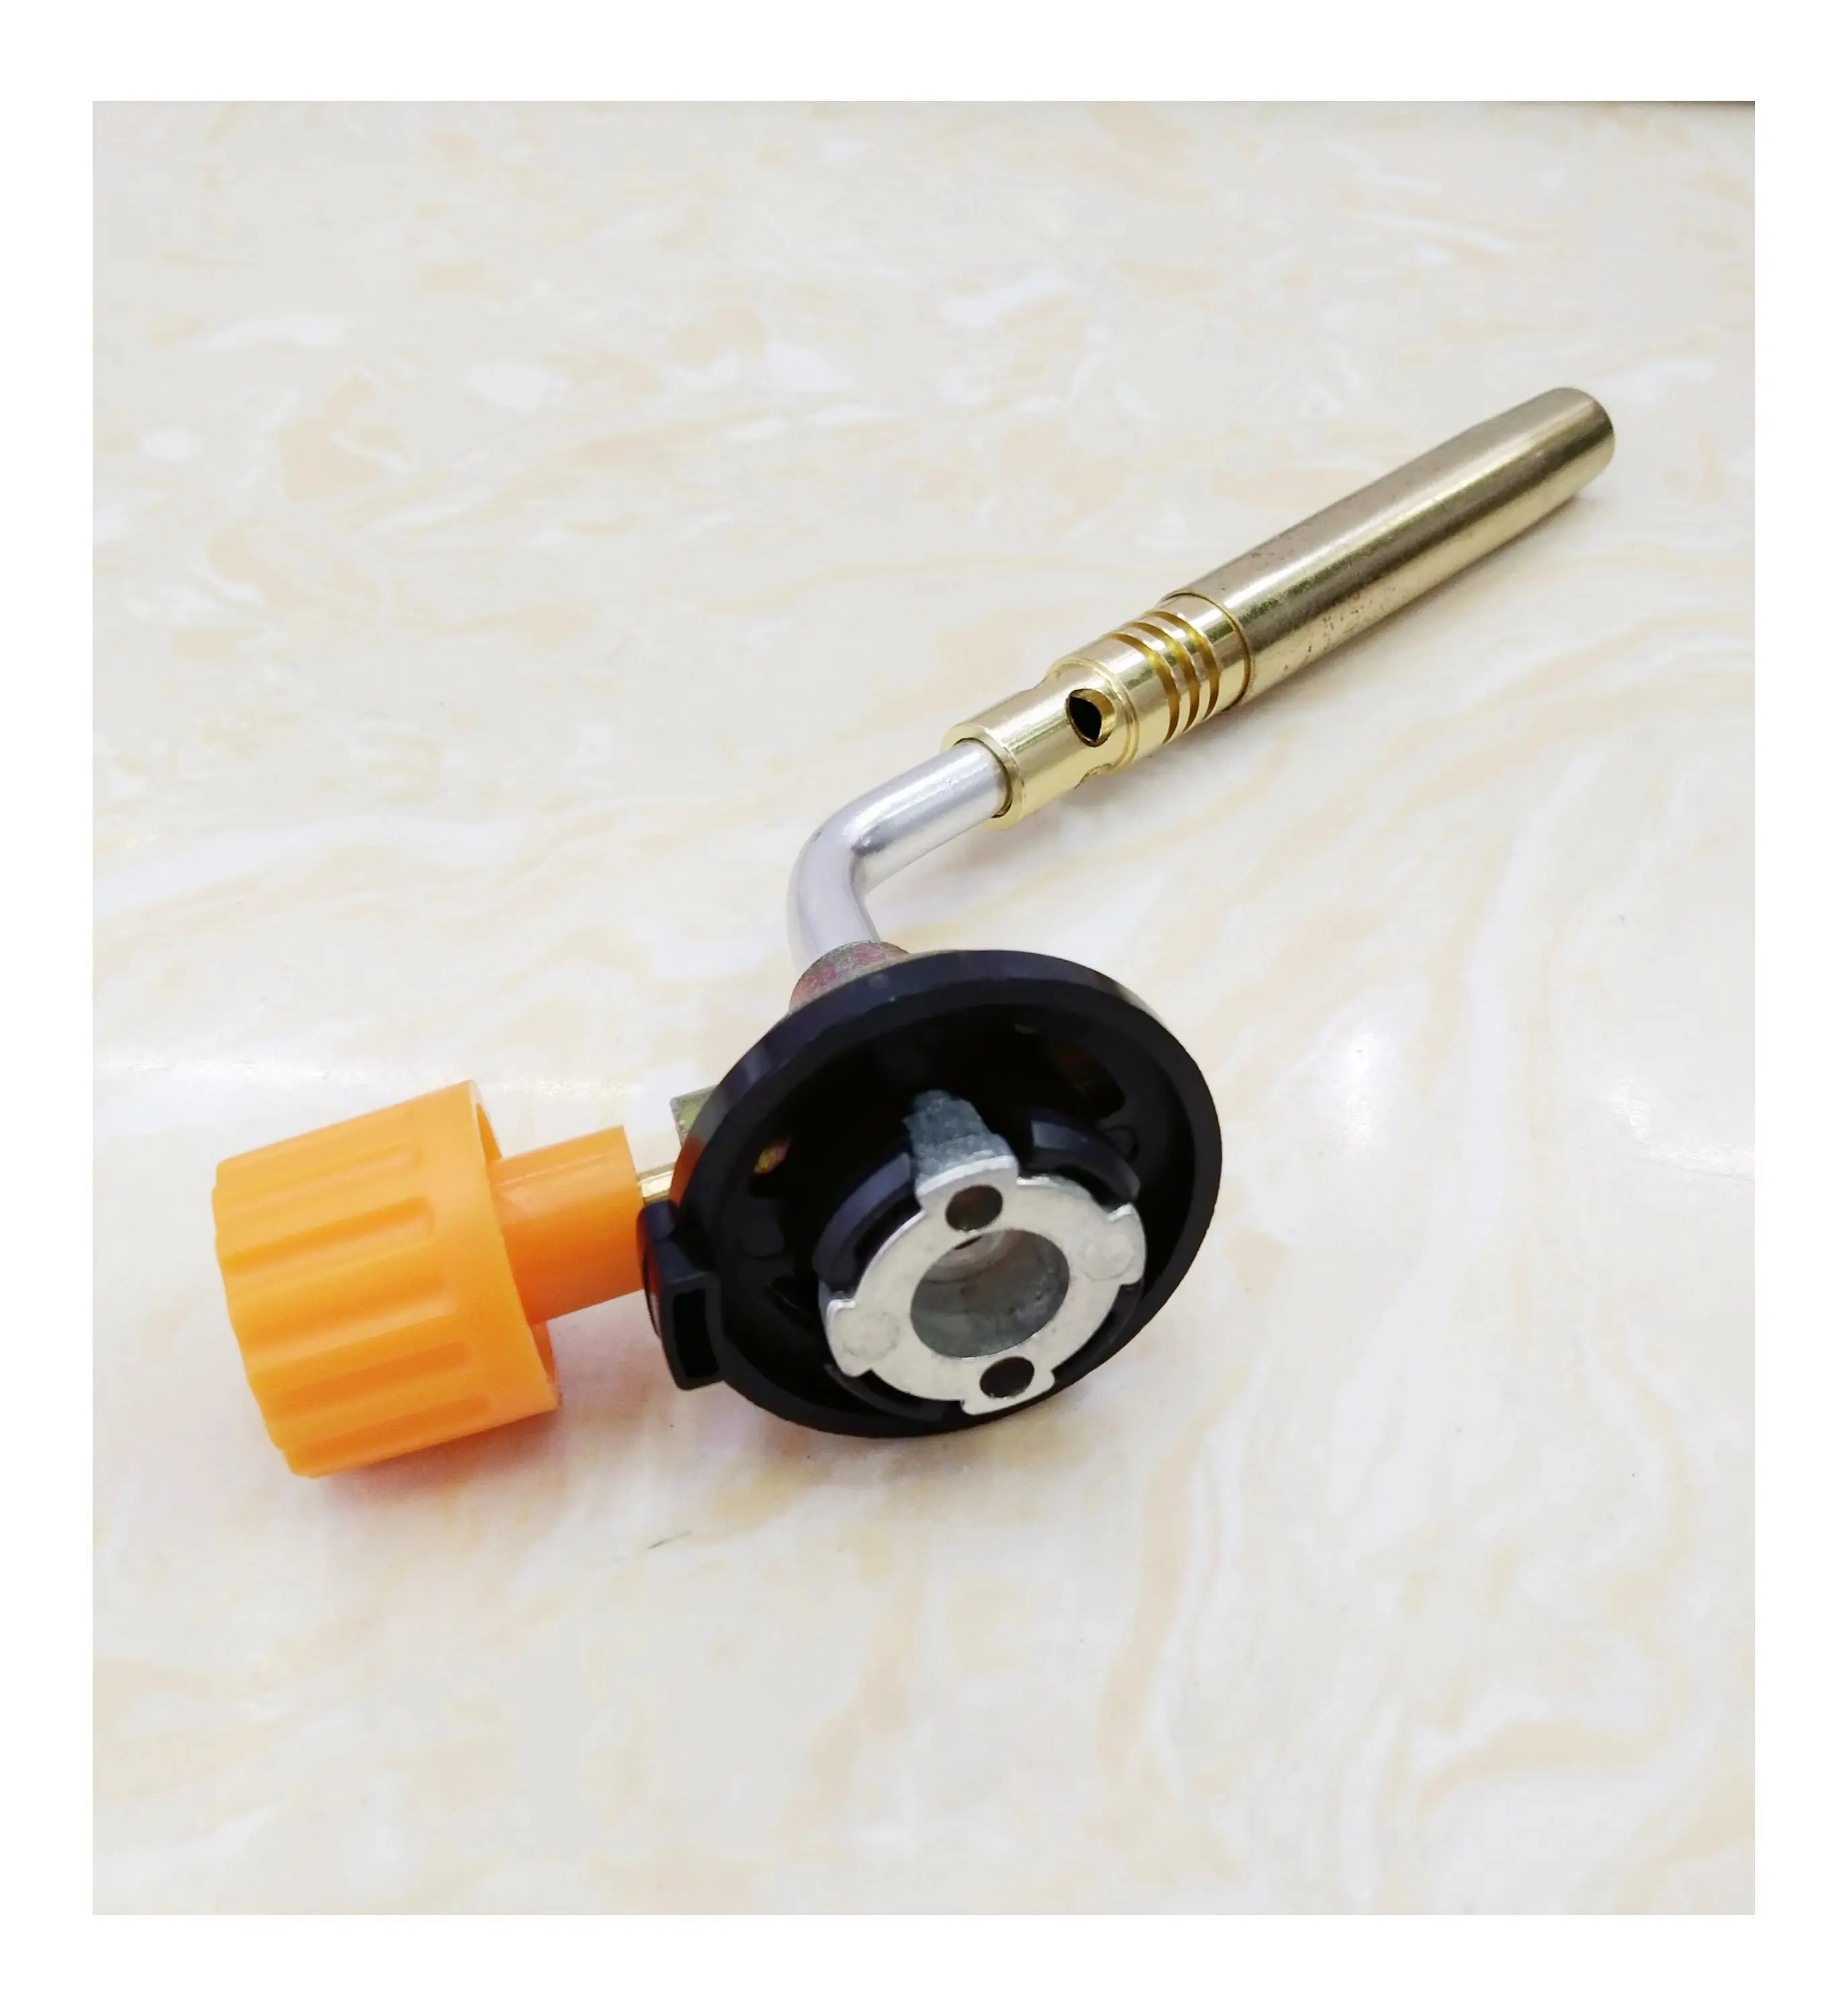 2022 popular product metal nozzle, temperature up to 1500 degrees Celsius, windproof camping lighter